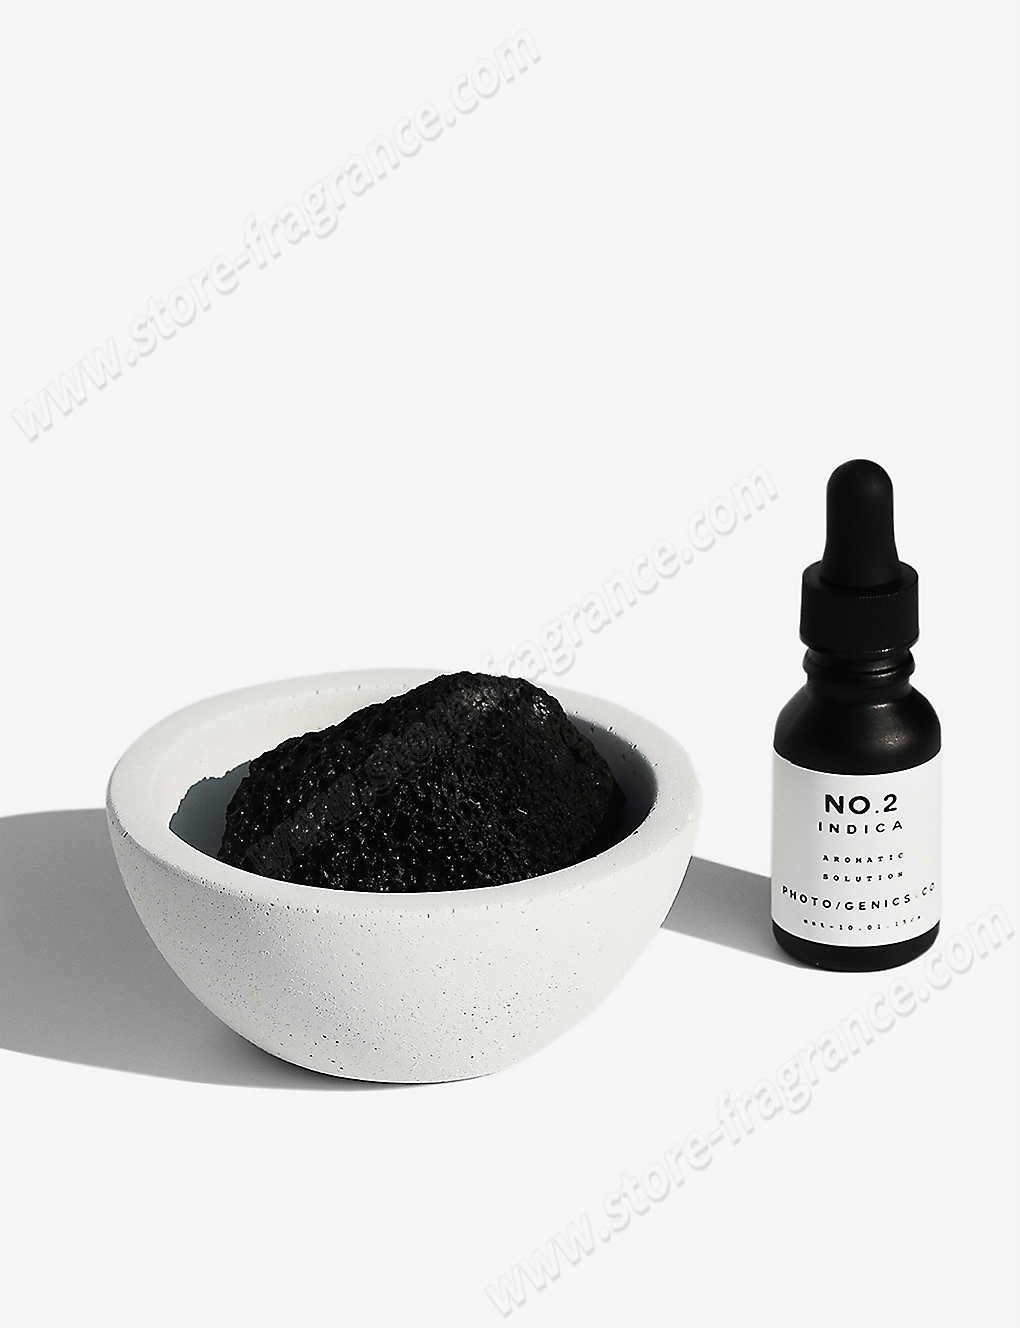 PHOTOGENICS & CO./No. 2 Indica aromatic solution with concrete bowl and lava rock .05oz Limit Offer - -0